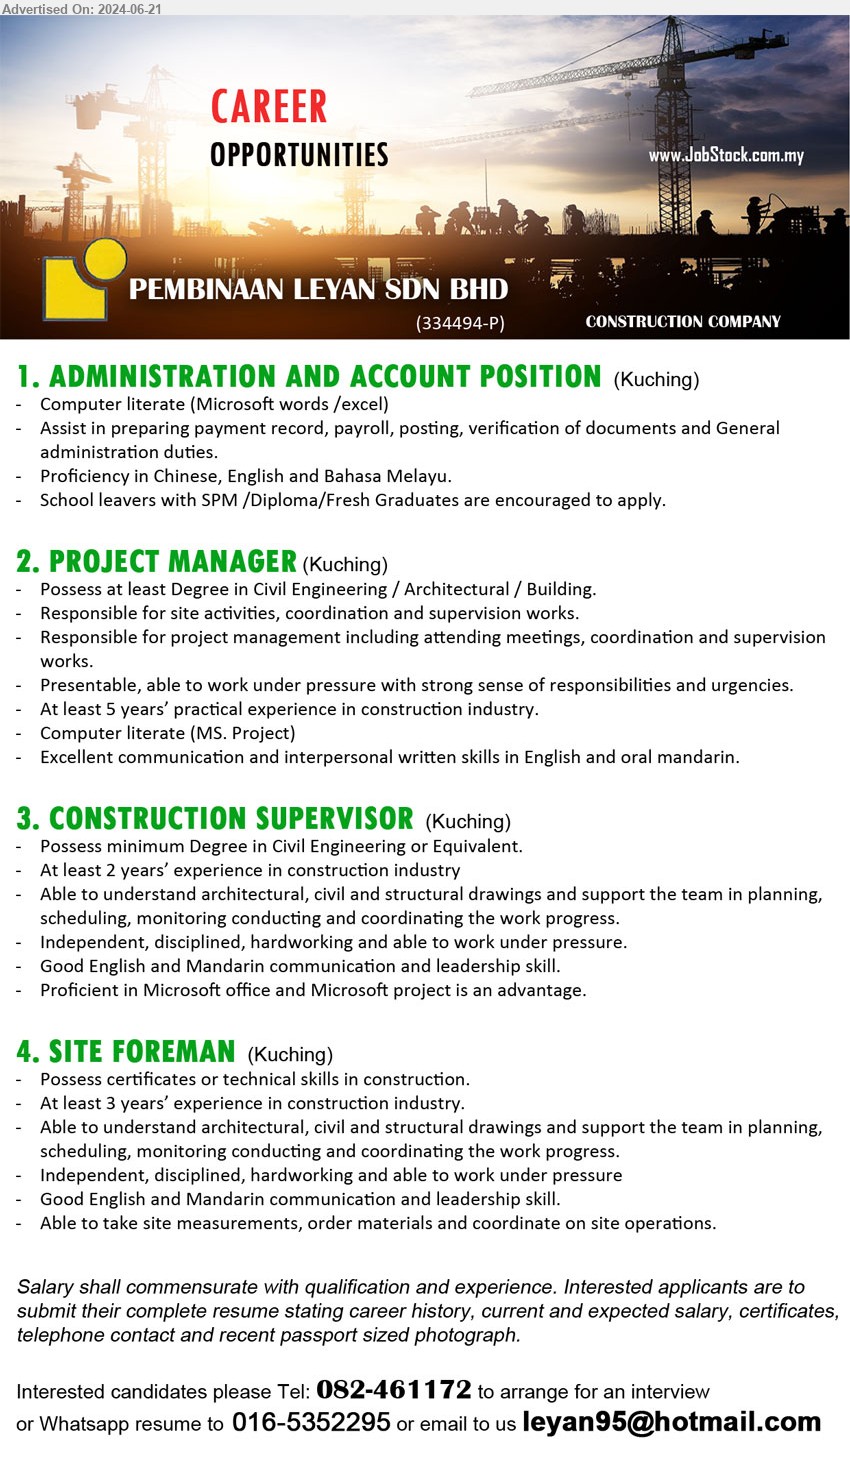 PEMBINAAN LEYAN SDN BHD - 1. ADMINISTRATION AND ACCOUNT POSITION (Kuching), Computer literate (Microsoft words /excel), SPM /Diploma/Fresh Graduates,...
2. PROJECT MANAGER (Kuching), Degree in Civil Engineering / Architectural / Building, Responsible for site activities, coordination and supervision works.,...
3. CONSTRUCTION SUPERVISOR (Kuching), Degree in Civil Engineering or Equivalent, At least 2 years’ experience in construction industry,...
4. SITE FOREMAN  (Kuching), Possess certificates or technical skills in construction, At least 3 years’ experience in construction industry.,...
Call 082-461172 / Whatsapp 016-5352295 / Email resume to ...